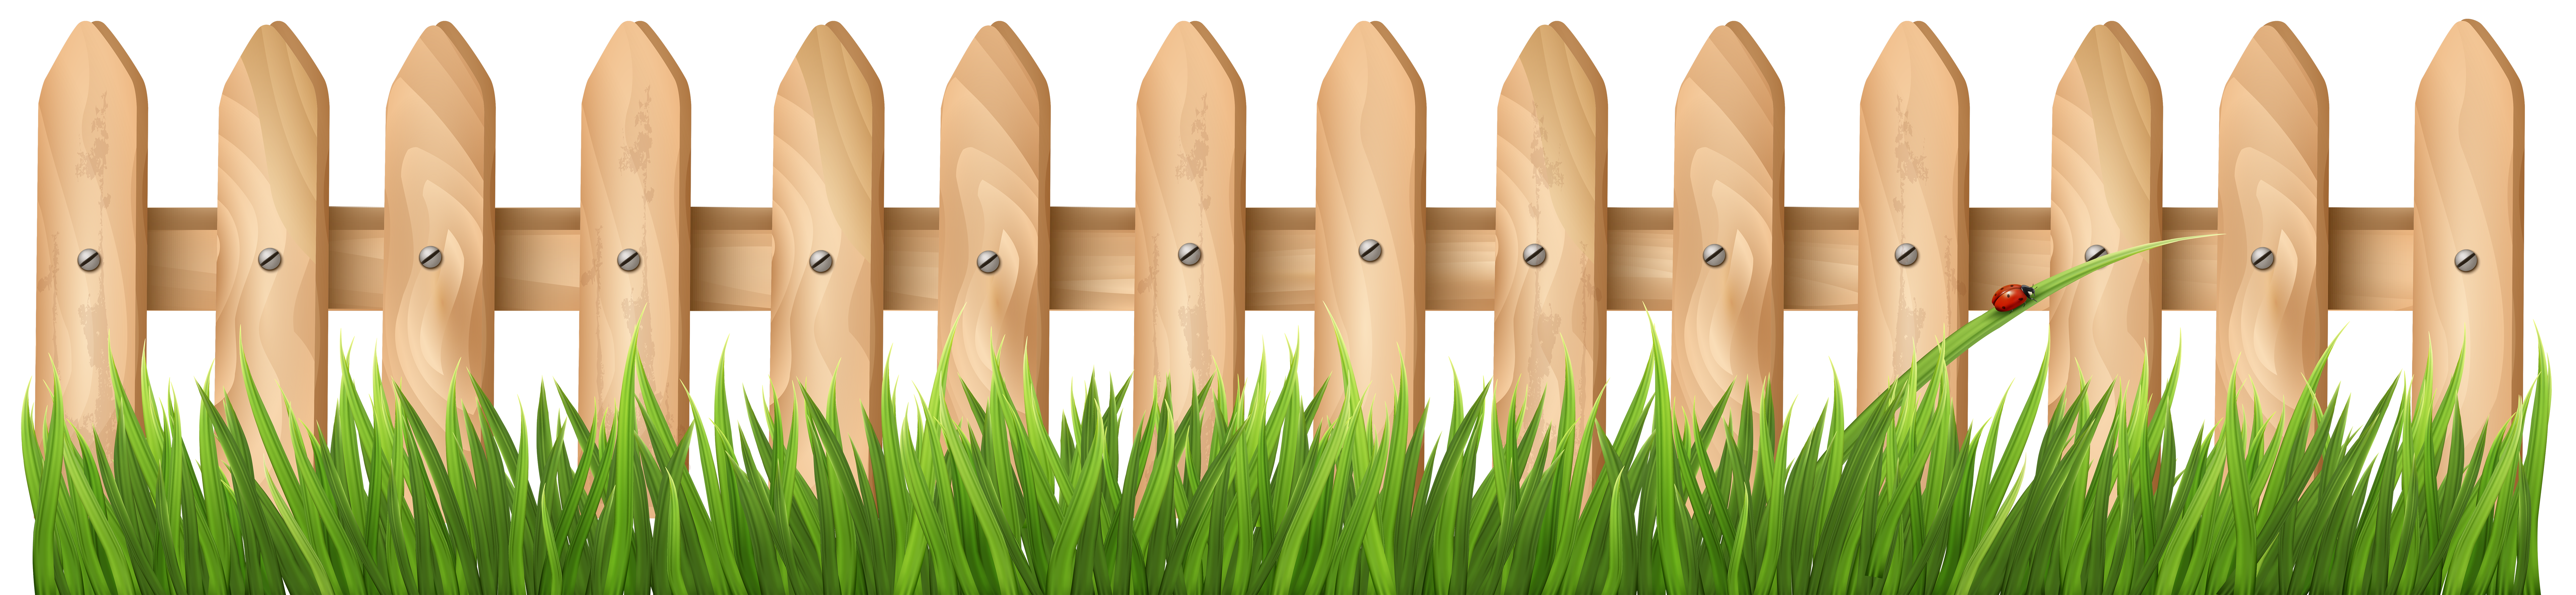 Fence clipart painting fence. With grass transparent png